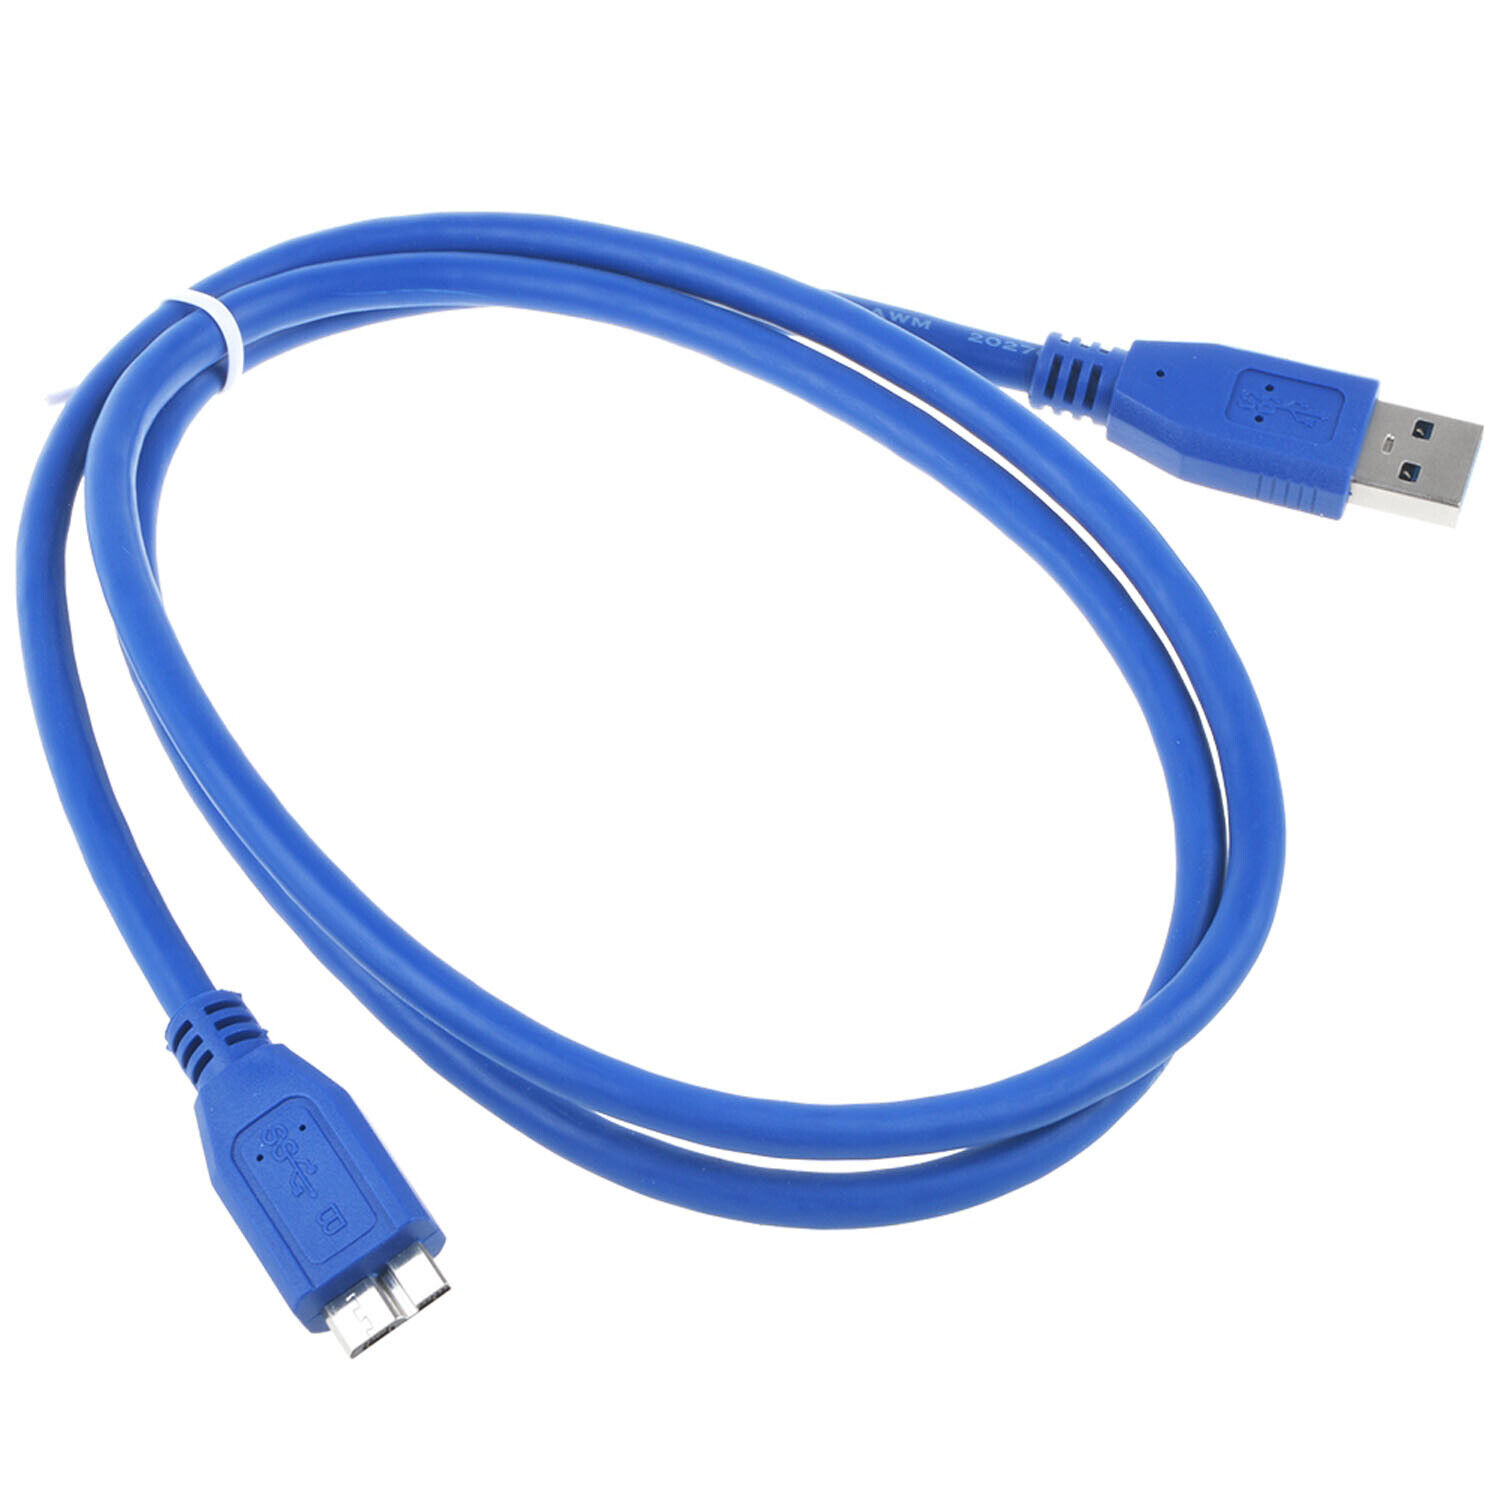 3.3ft Micro USB 3.0 Data Sync Cord Cable for WD My Passport External Hard Drive